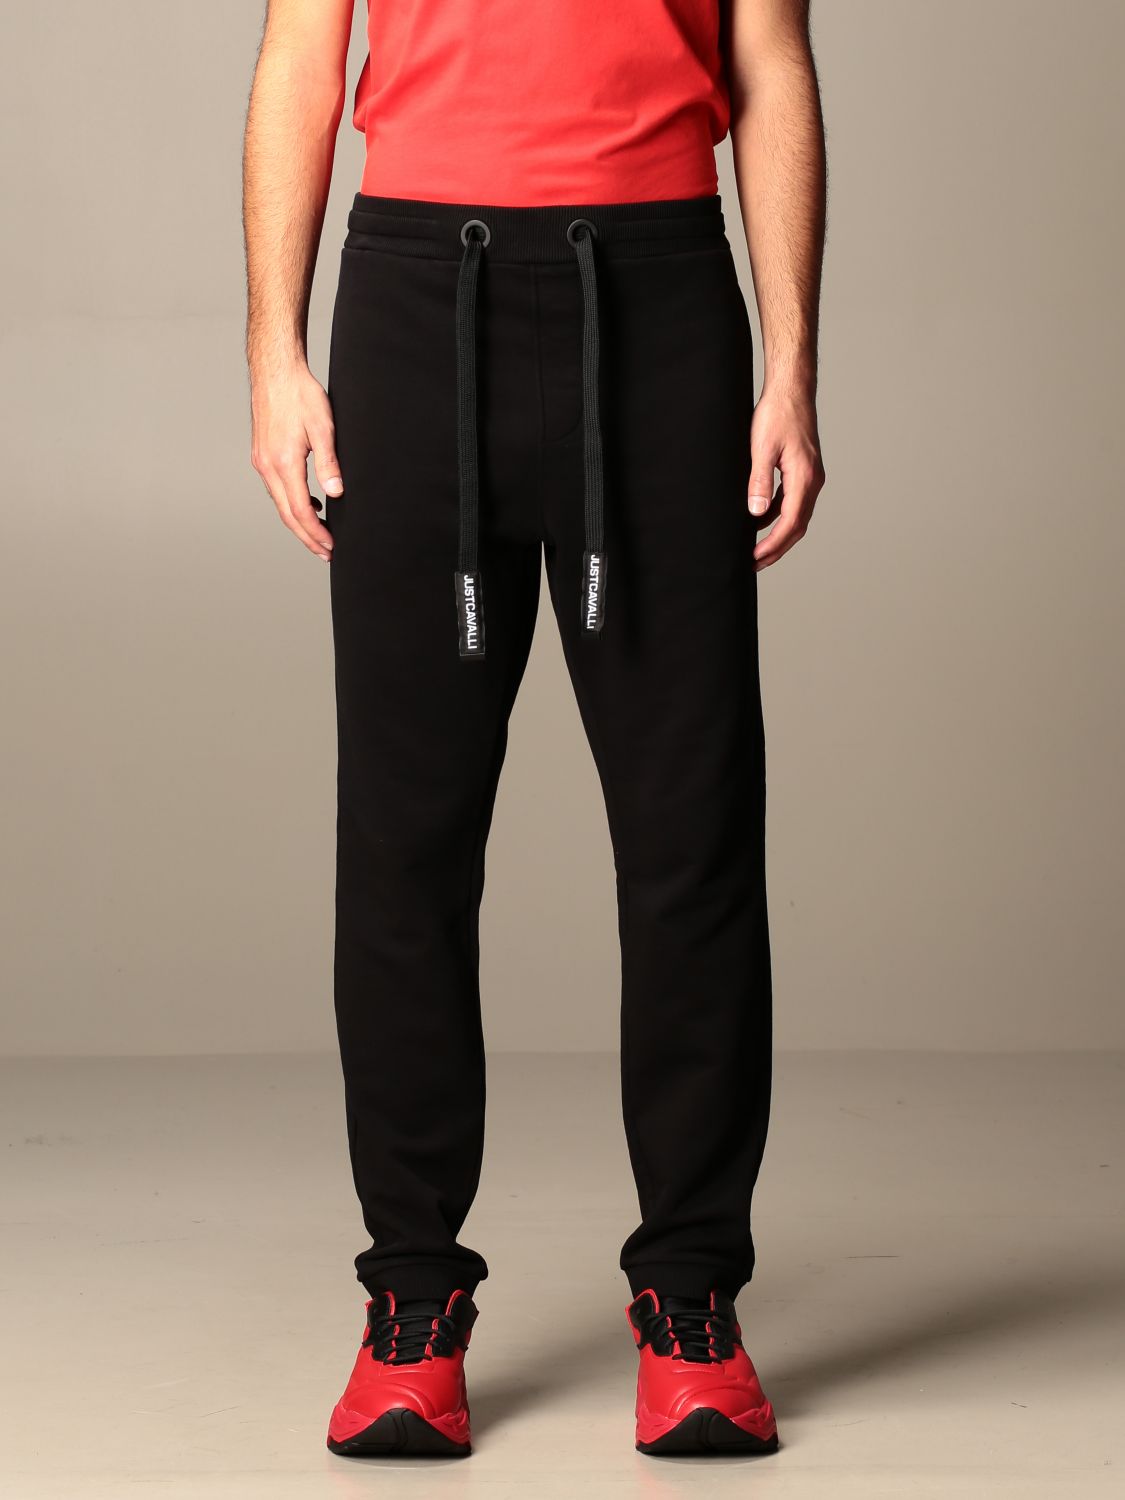 Just Cavalli Outlet: jogging trousers with big logo - Black | Pants ...